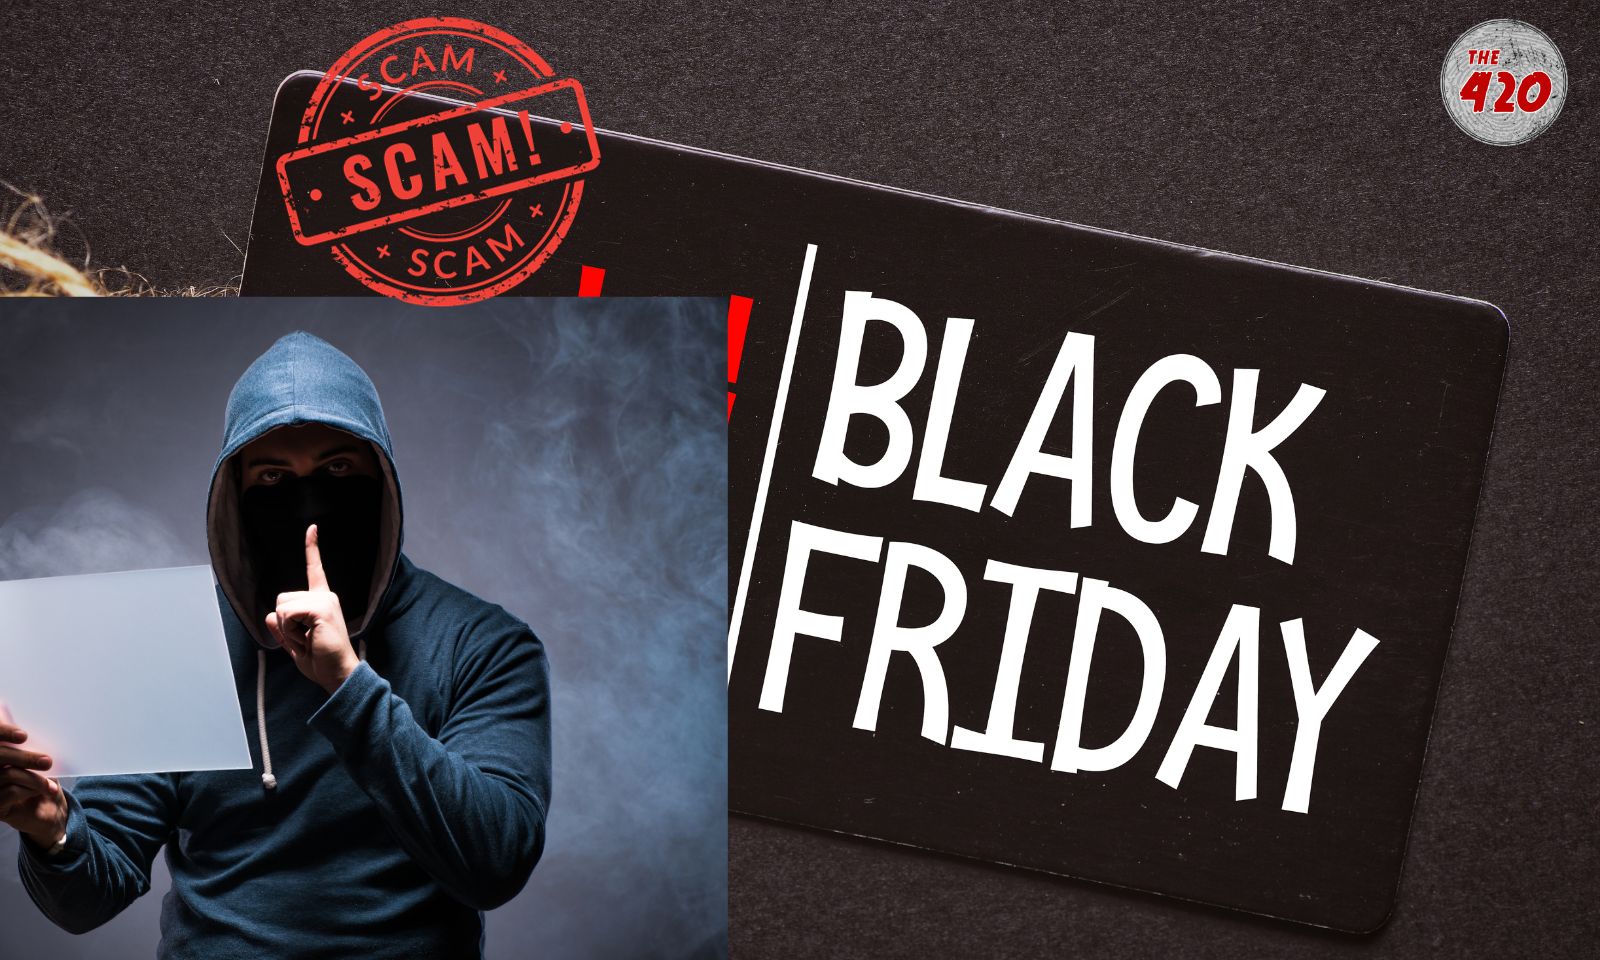 Black Friday Cybersecurity Alert: Beware of Scams and Fake Deals,